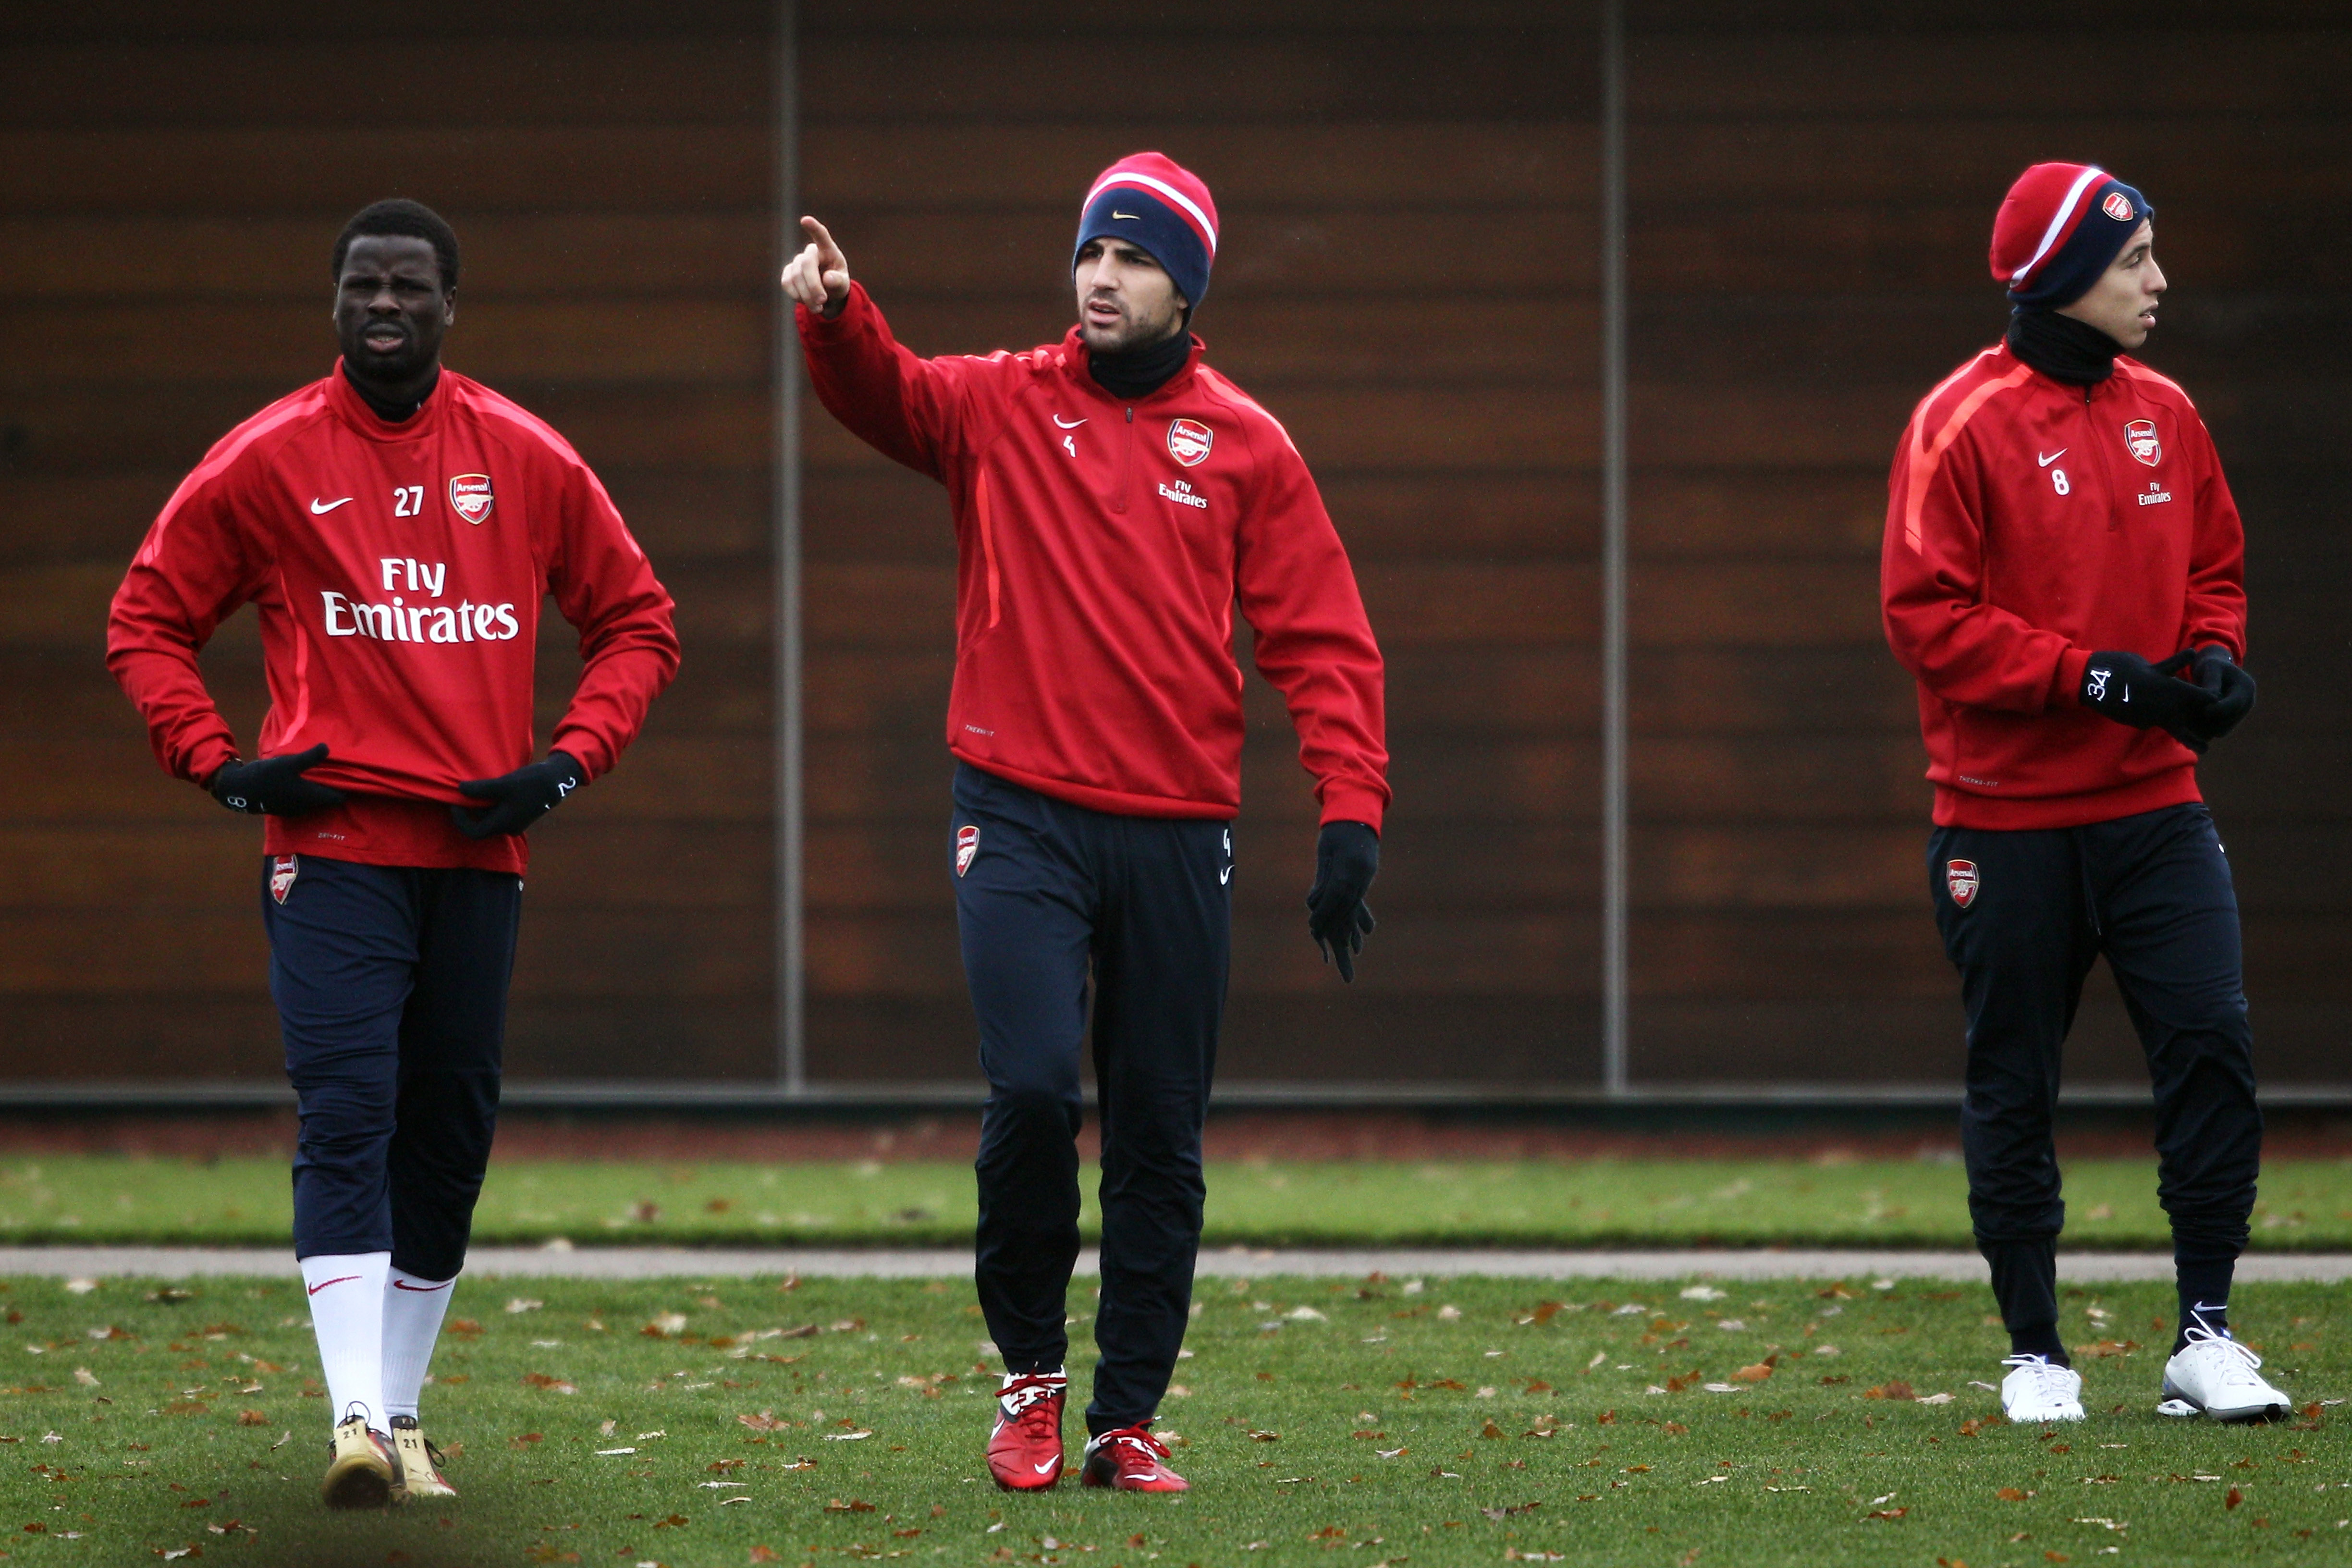 ST ALBANS, ENGLAND - DECEMBER 15:  Cesc Fabregas (C) speaks to Emmanuel Eboue (L) as they walk out to the Arsenal Training Session at London Colney on December 15, 2010 in St Albans, England.  (Photo by Dean Mouhtaropoulos/Getty Images)